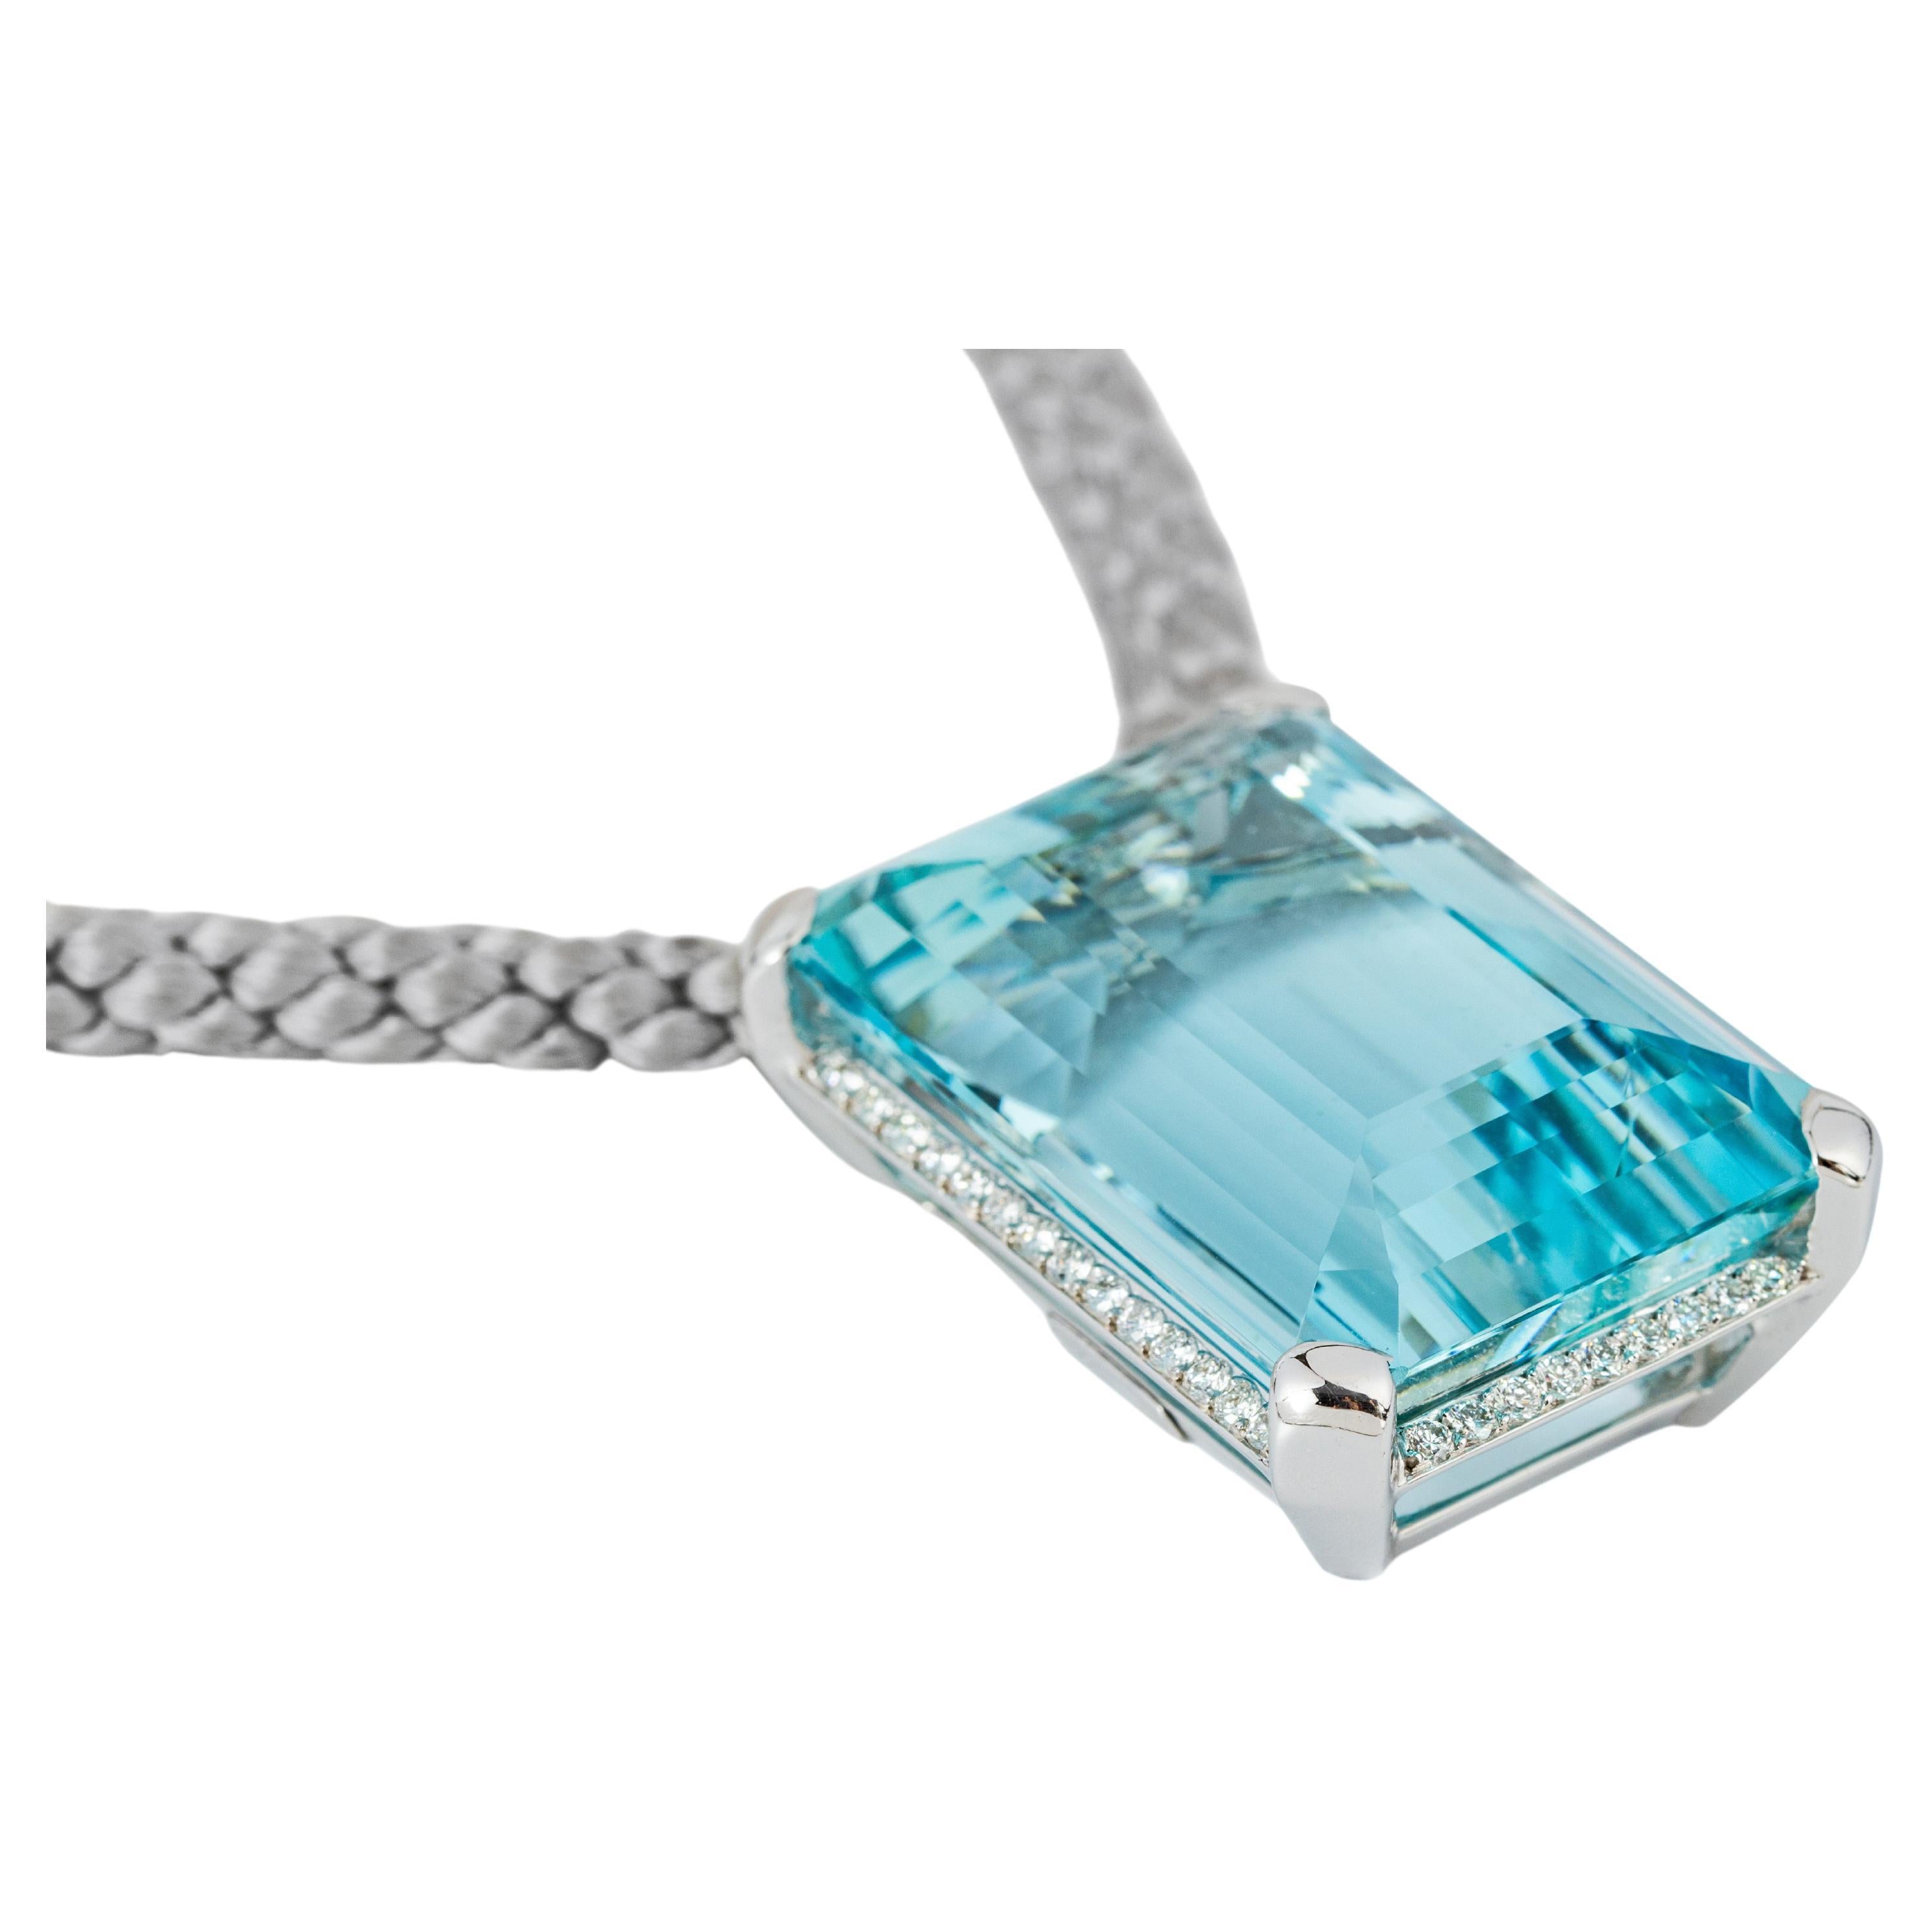 "Costis" Pendant / Necklace with 107.62 Carats Aquamarine and Diamonds For Sale